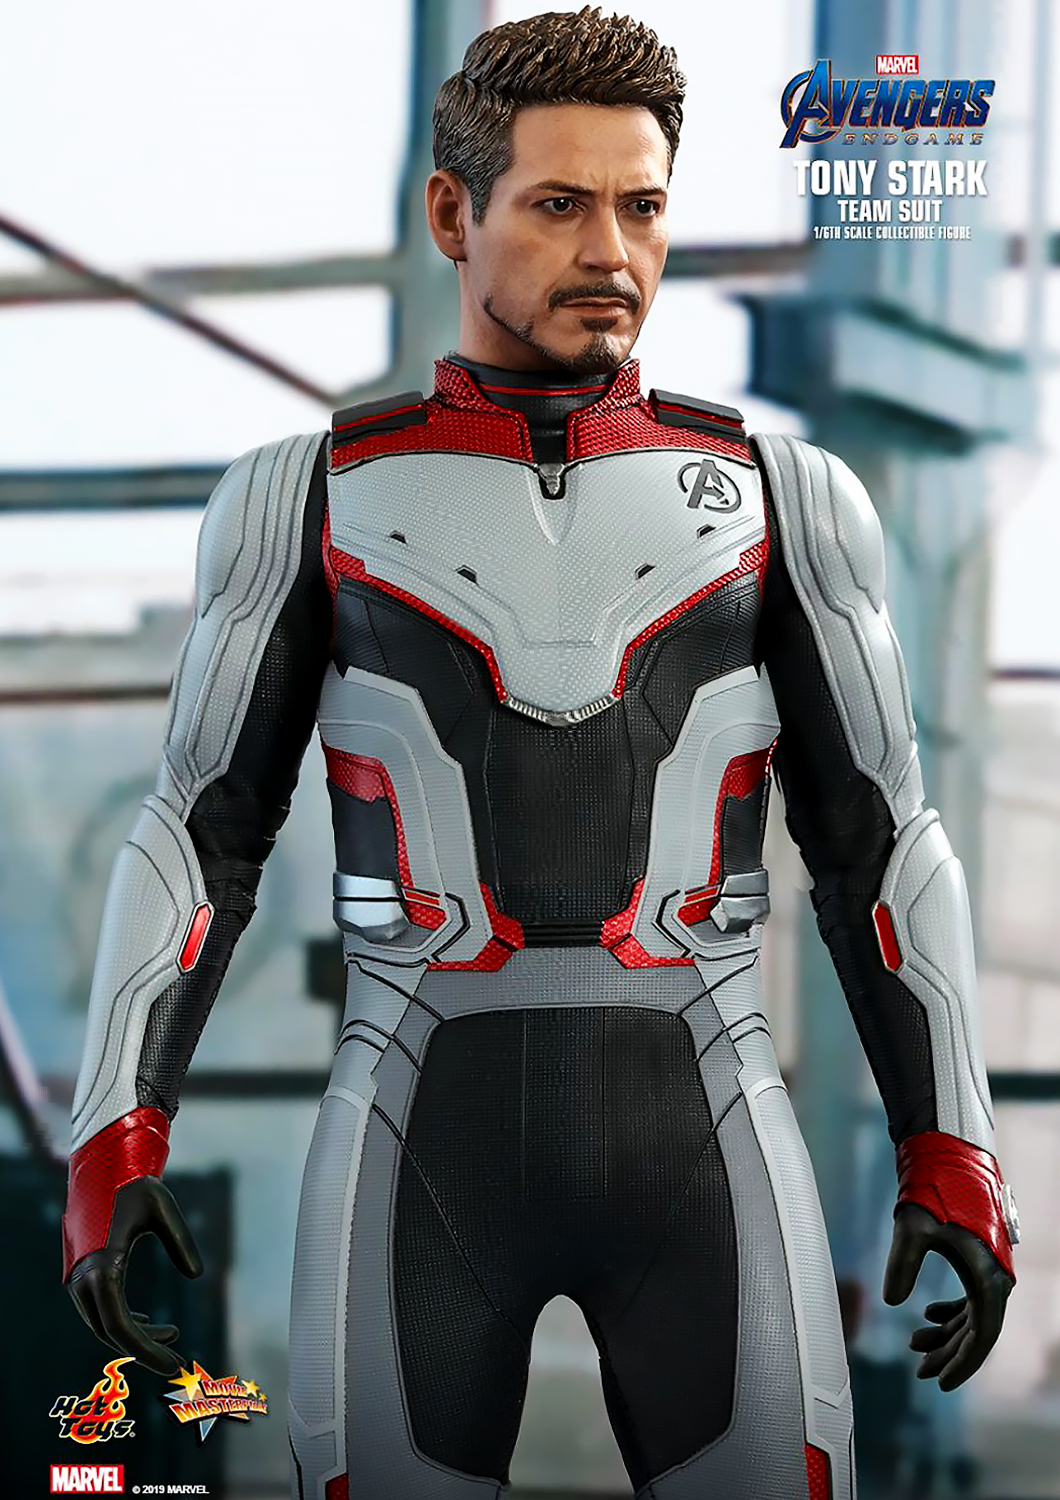 HOT TOYS MARVEL AVENGERS MARVEL : ENDGAME TONY STARK (TEAM SUIT) 1/6TH SCALE COLLECTIBLE FIGURE - MMS537 - Anotoys Collectibles